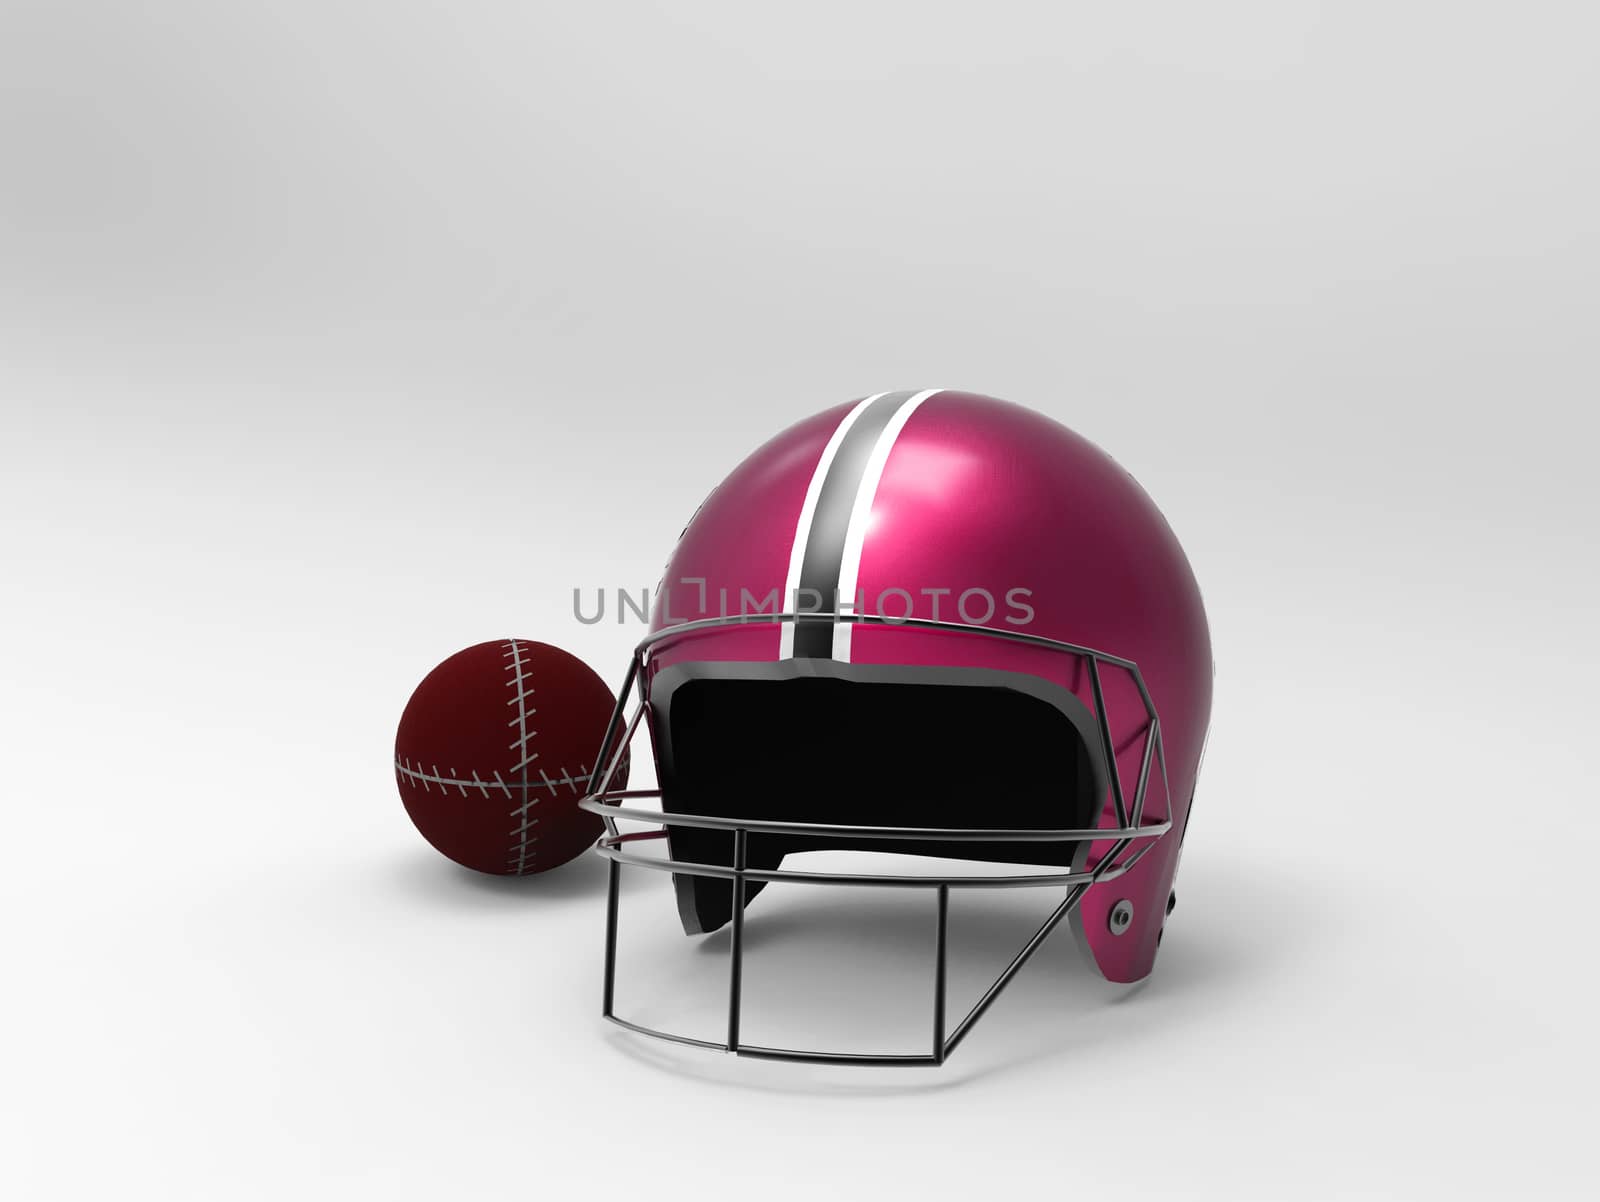 Rugby helmet and ball by apichart